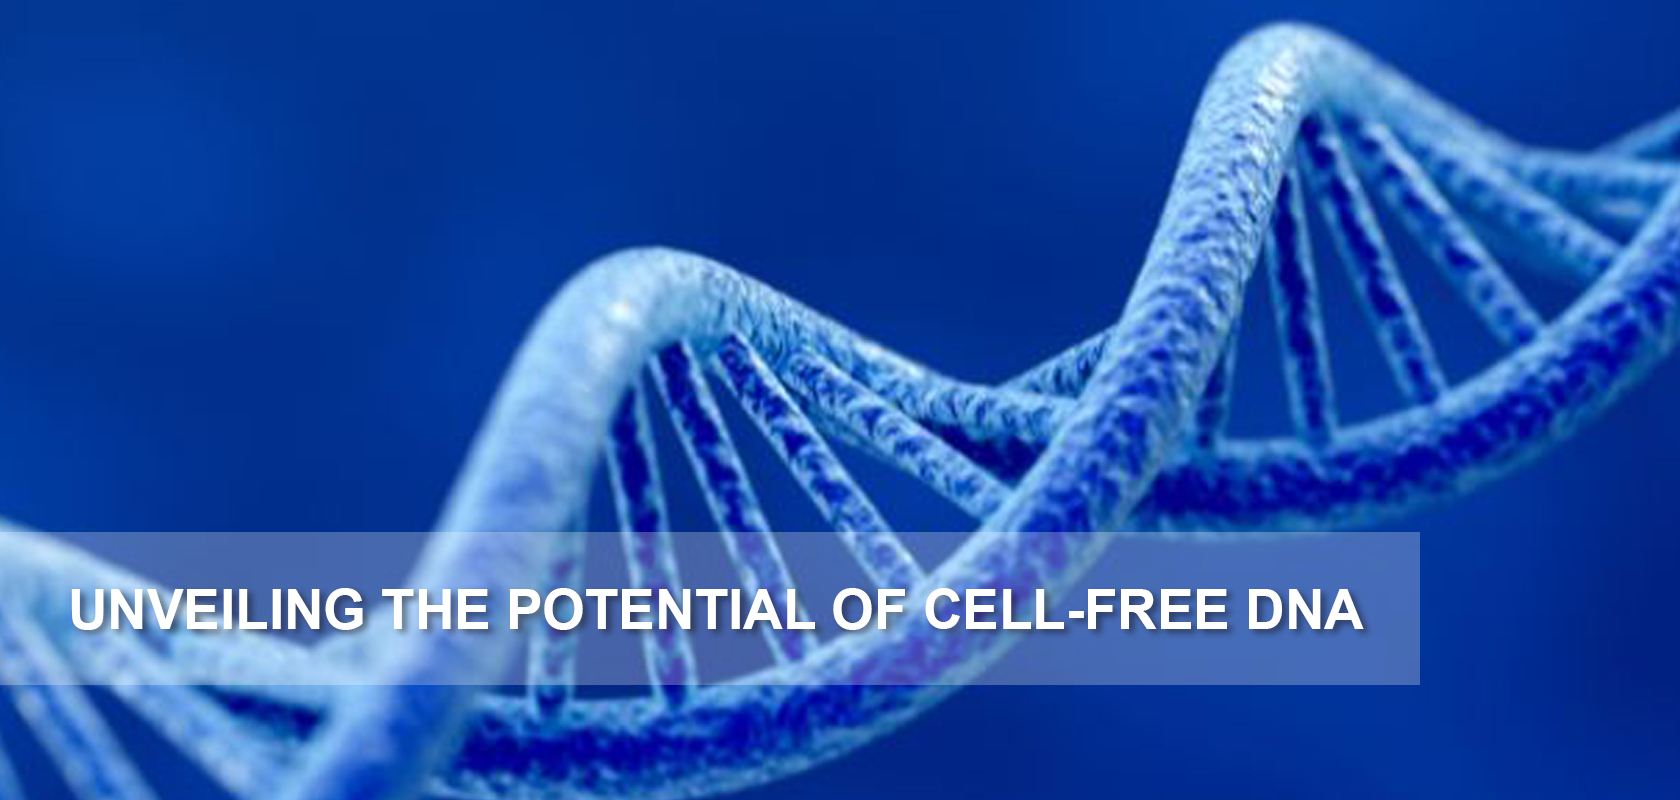 UNVEILING THE POTENTIAL OF CELL-FREE DNA